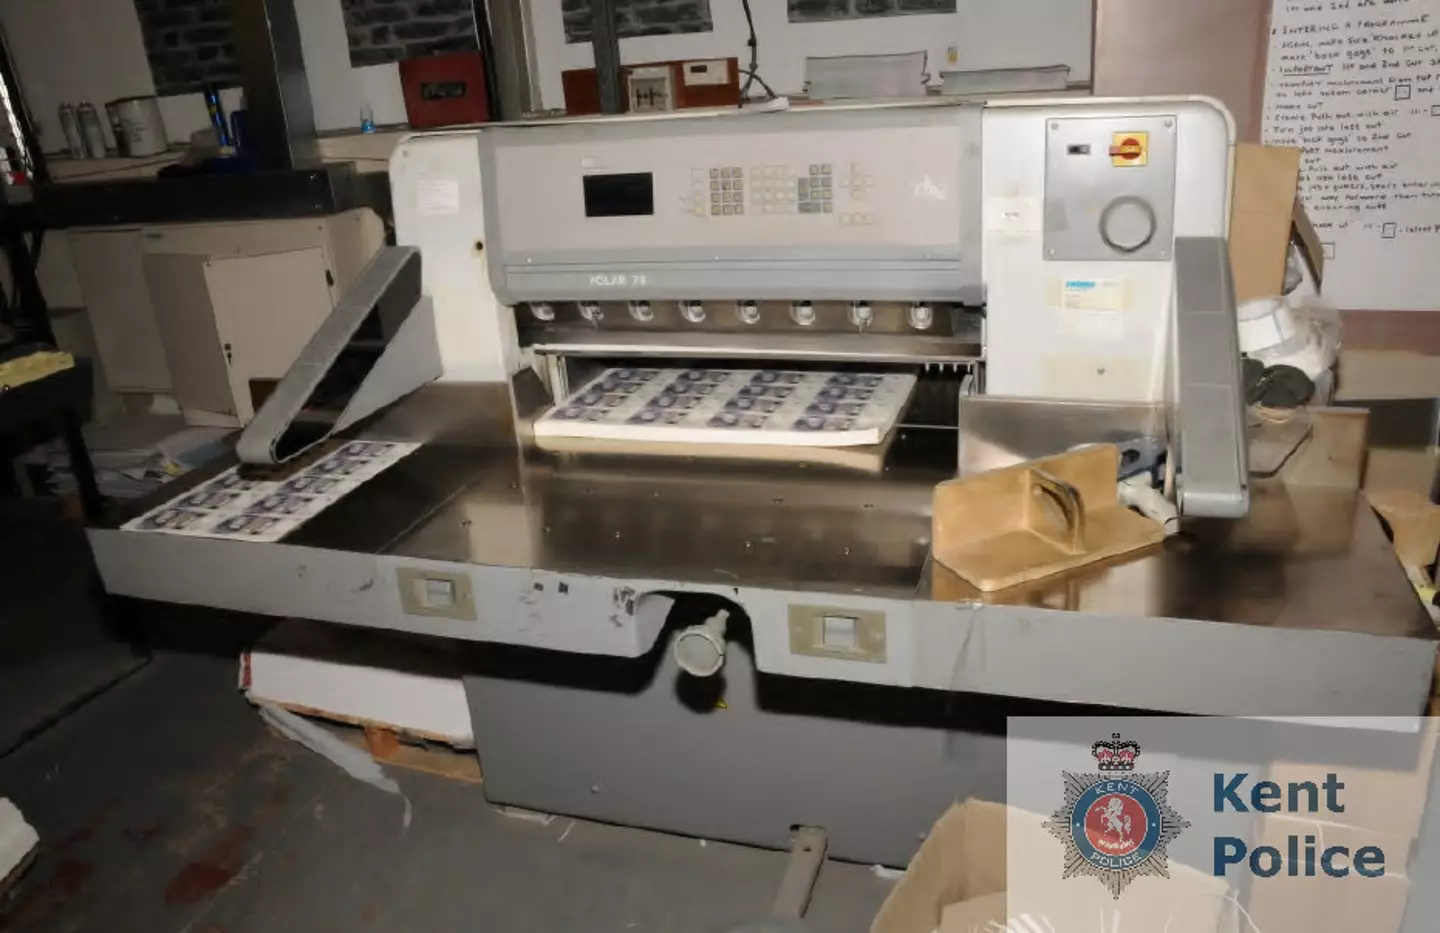 The gang used a machine to print out fake £20 notes. Credit SWNS/Kent Police